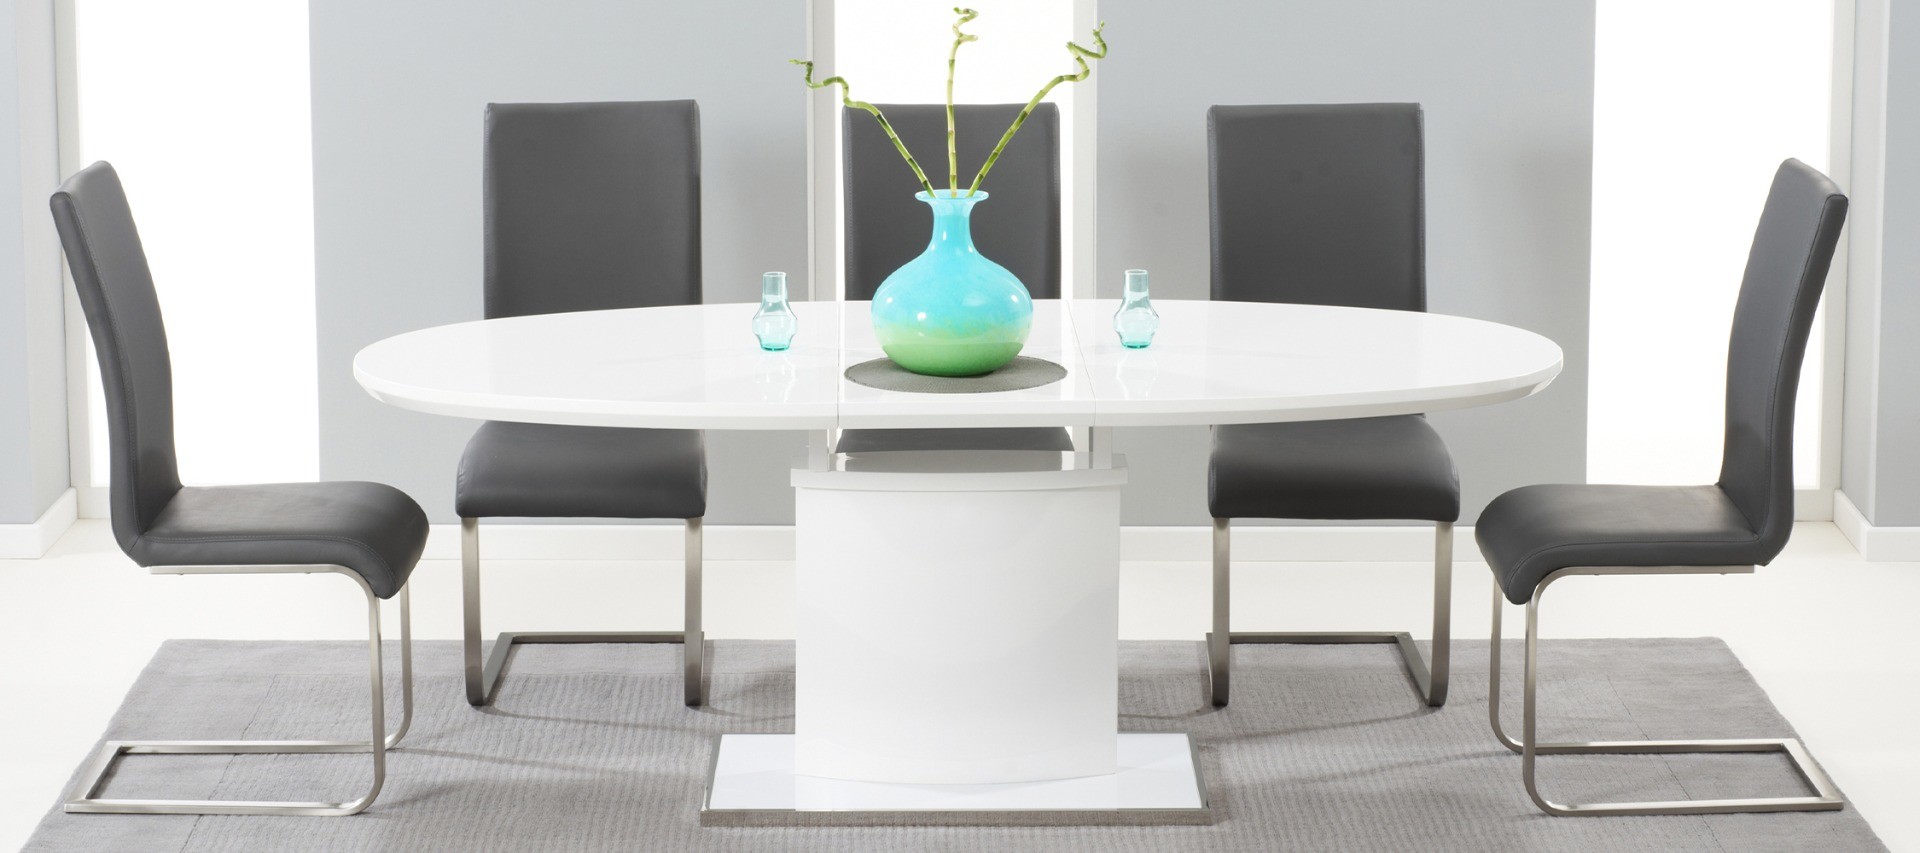 Photo 1 of Extending valzo 160cm white high gloss pedestal dining table with 4 black austin chairs